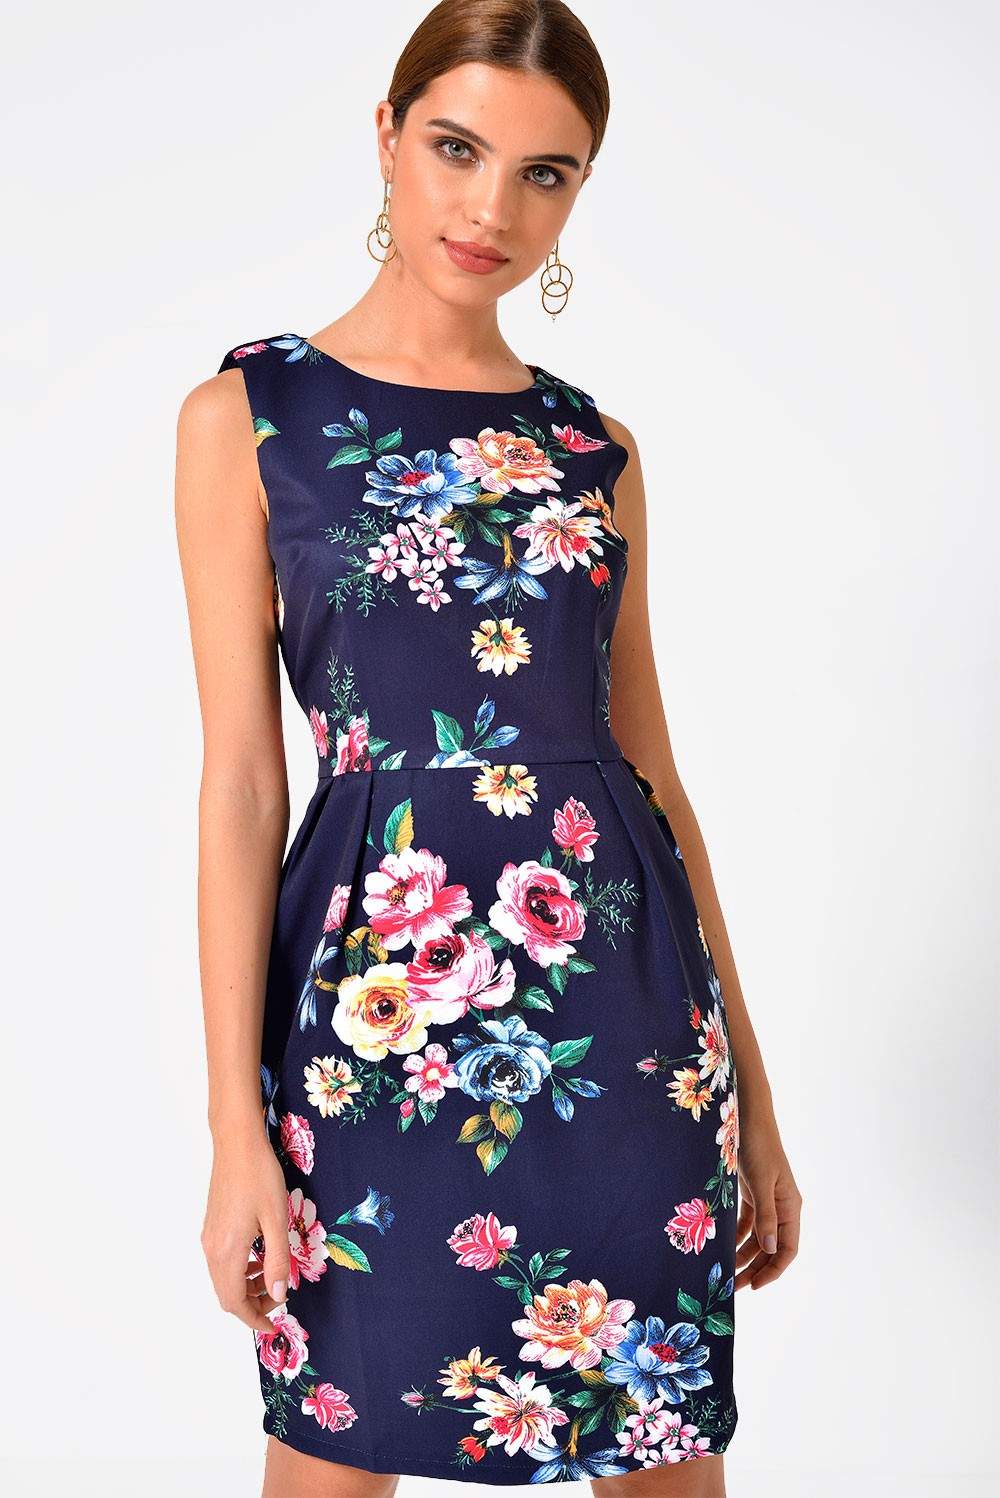 Marc Angelo Ava Floral Print Dress in Navy | iCLOTHING